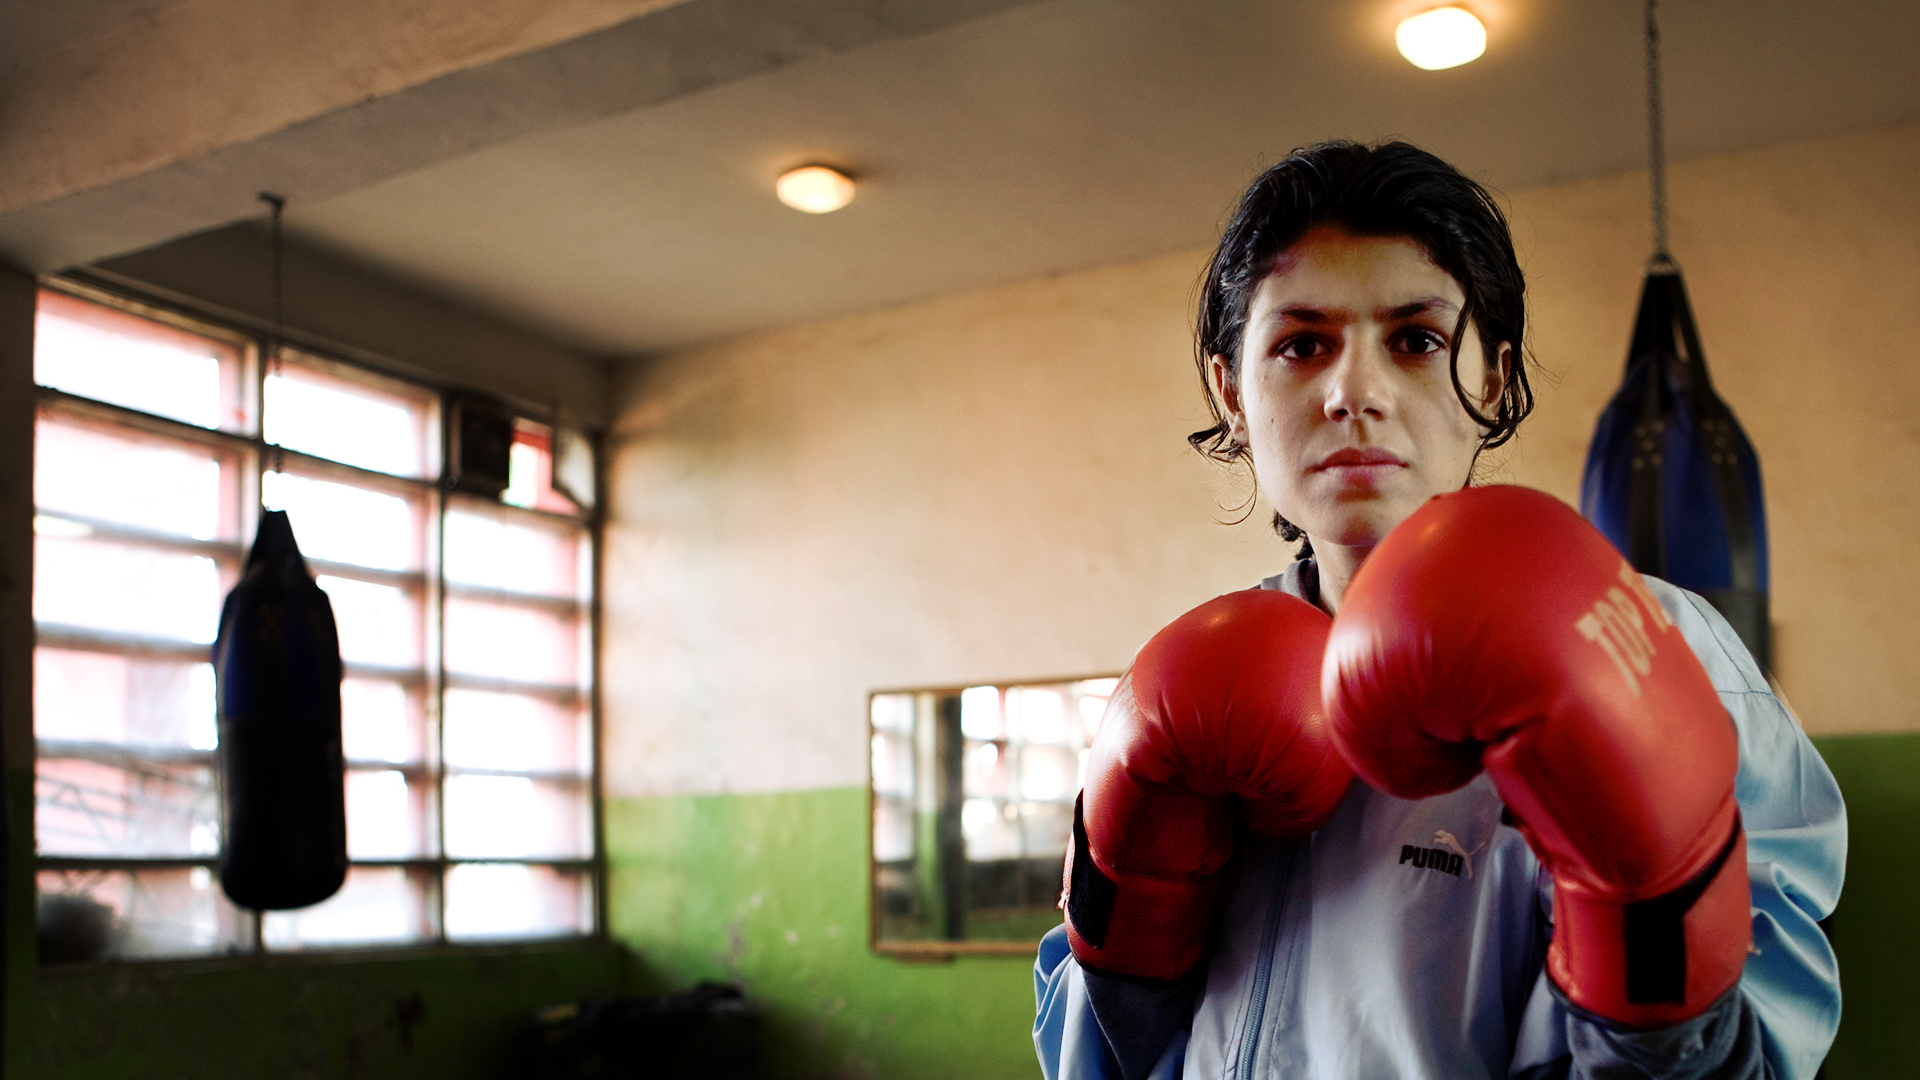 The Boxing Girls of Kabul